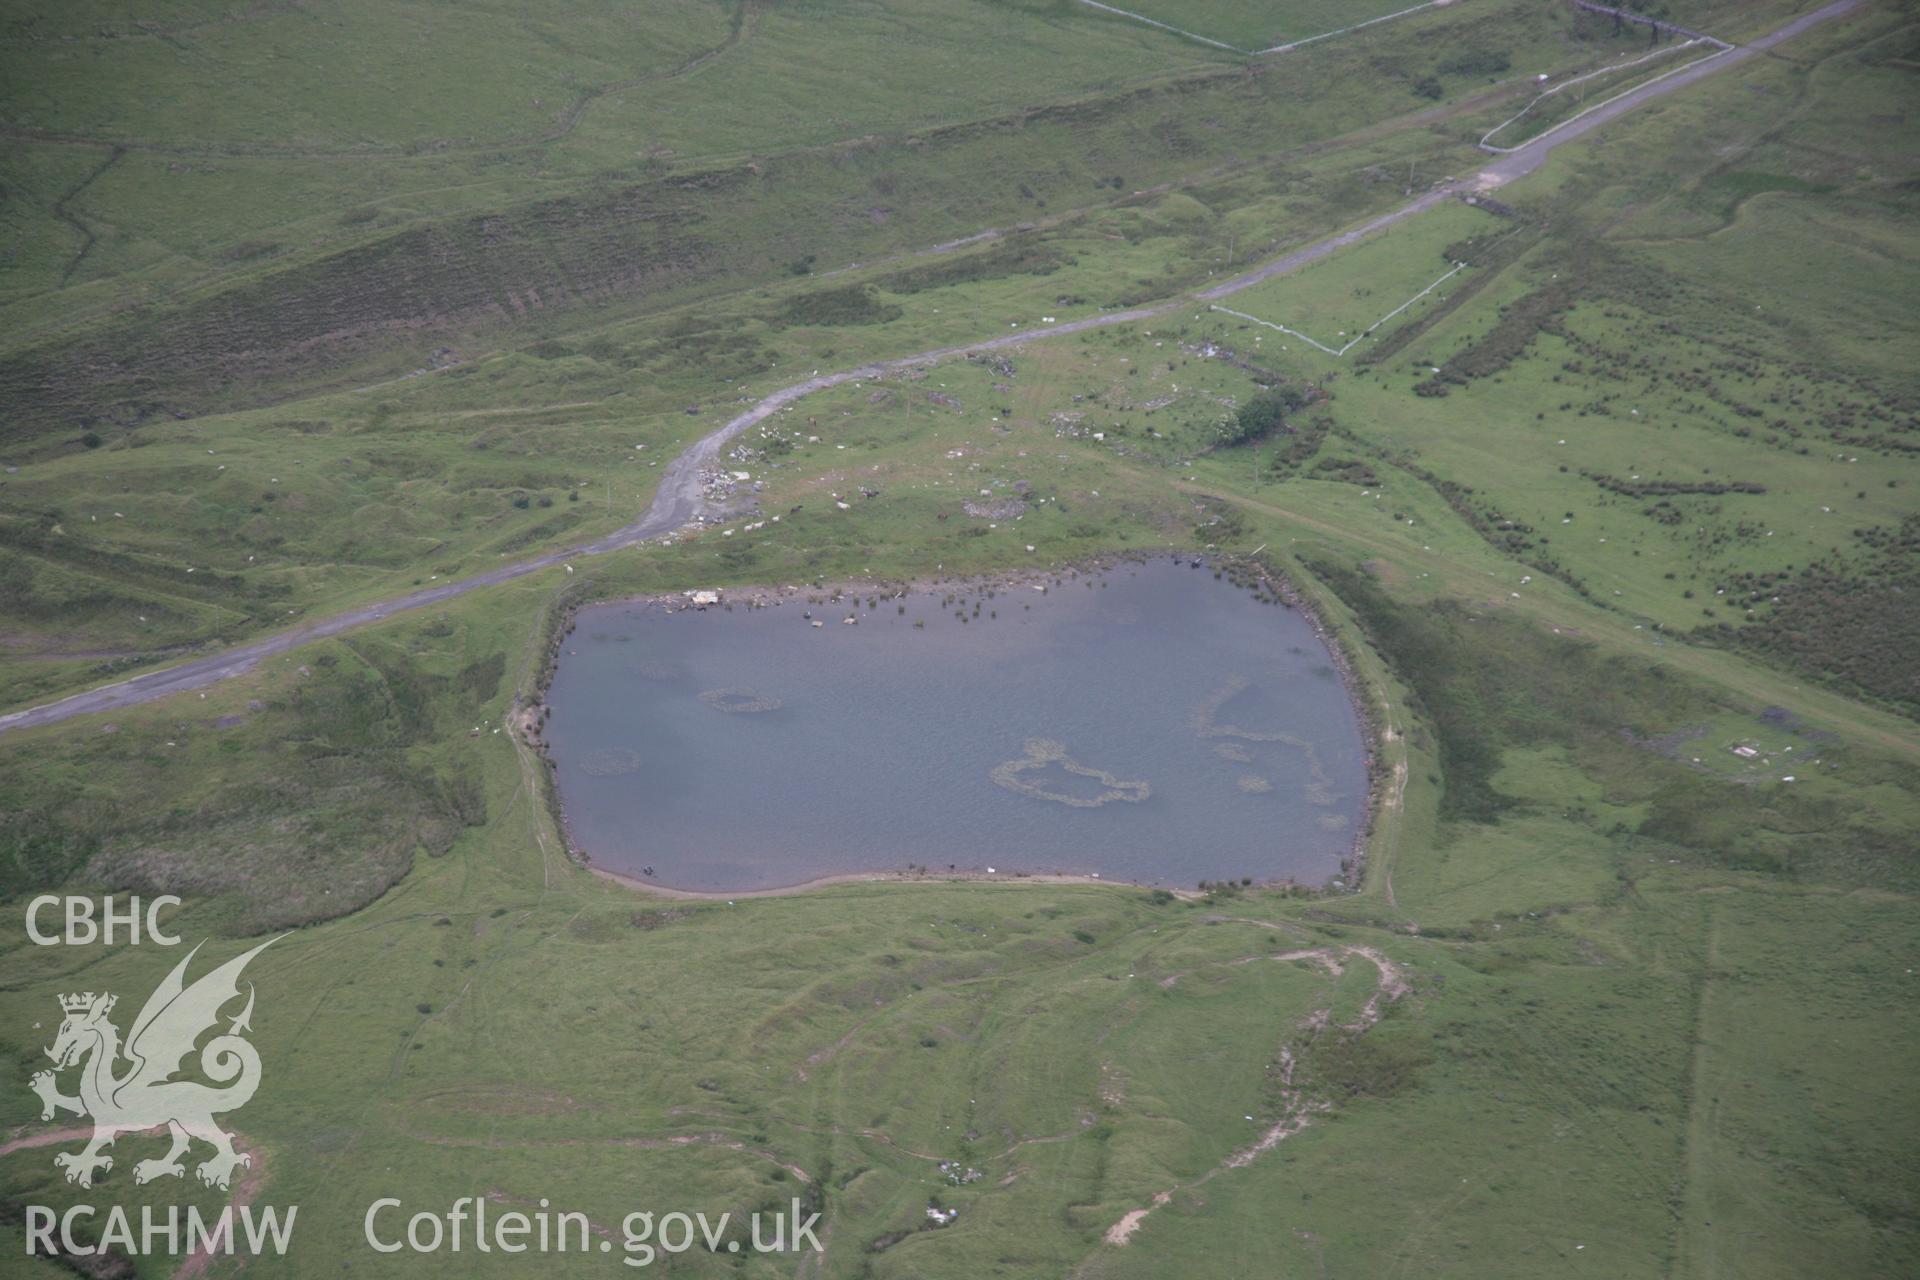 RCAHMW digital colour oblique photograph of Sarn Howell pond viewed from the south. Taken on 07/07/2005 by T.G. Driver.